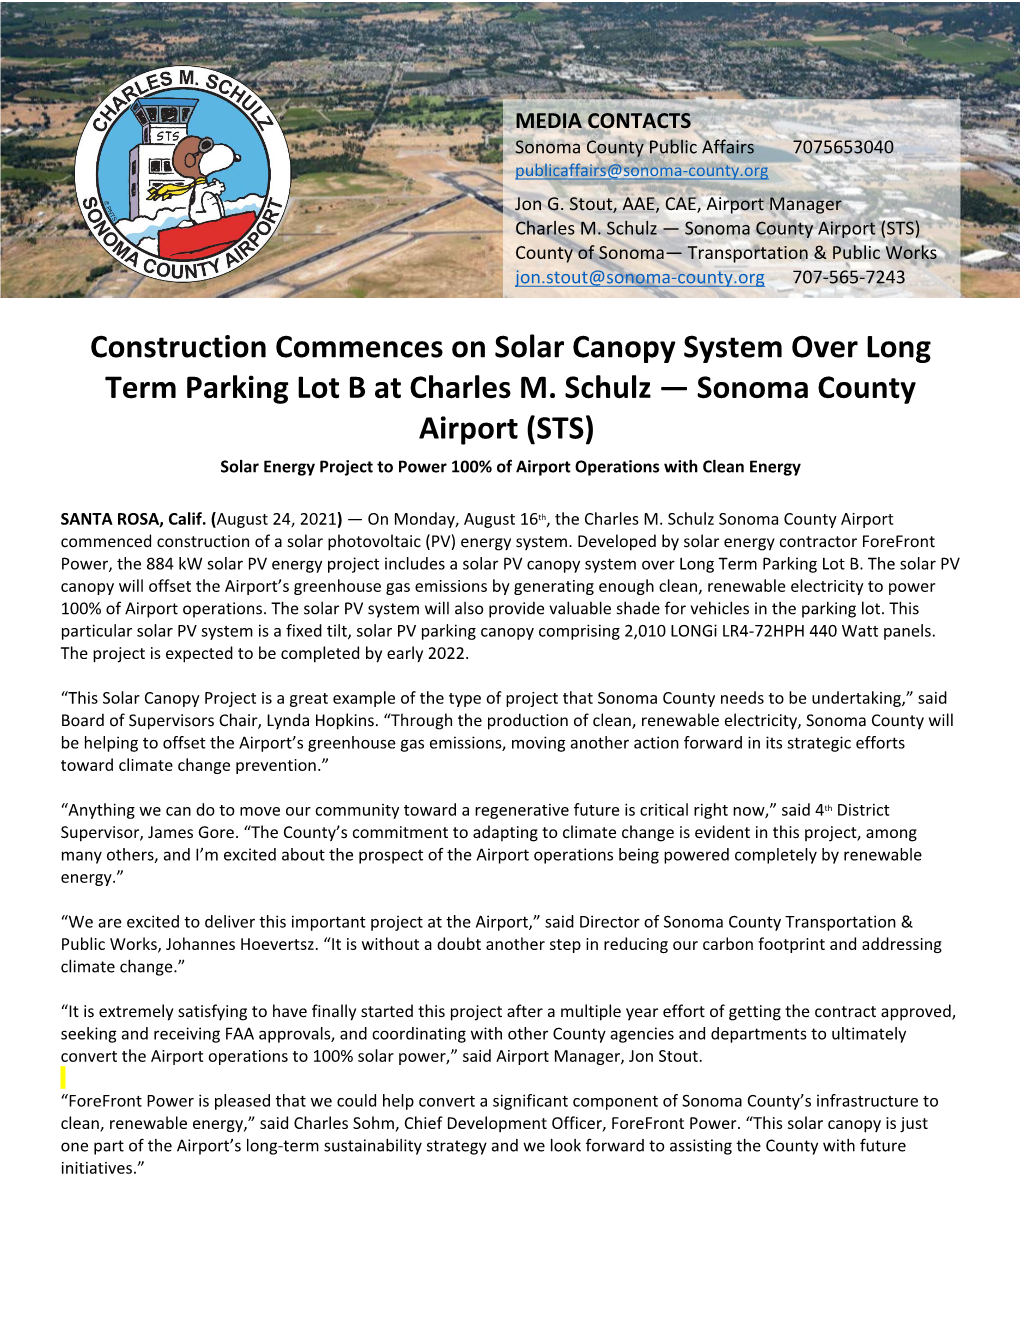 Construction Commences on Solar Canopy System Over Long Term Parking Lot B at Charles M